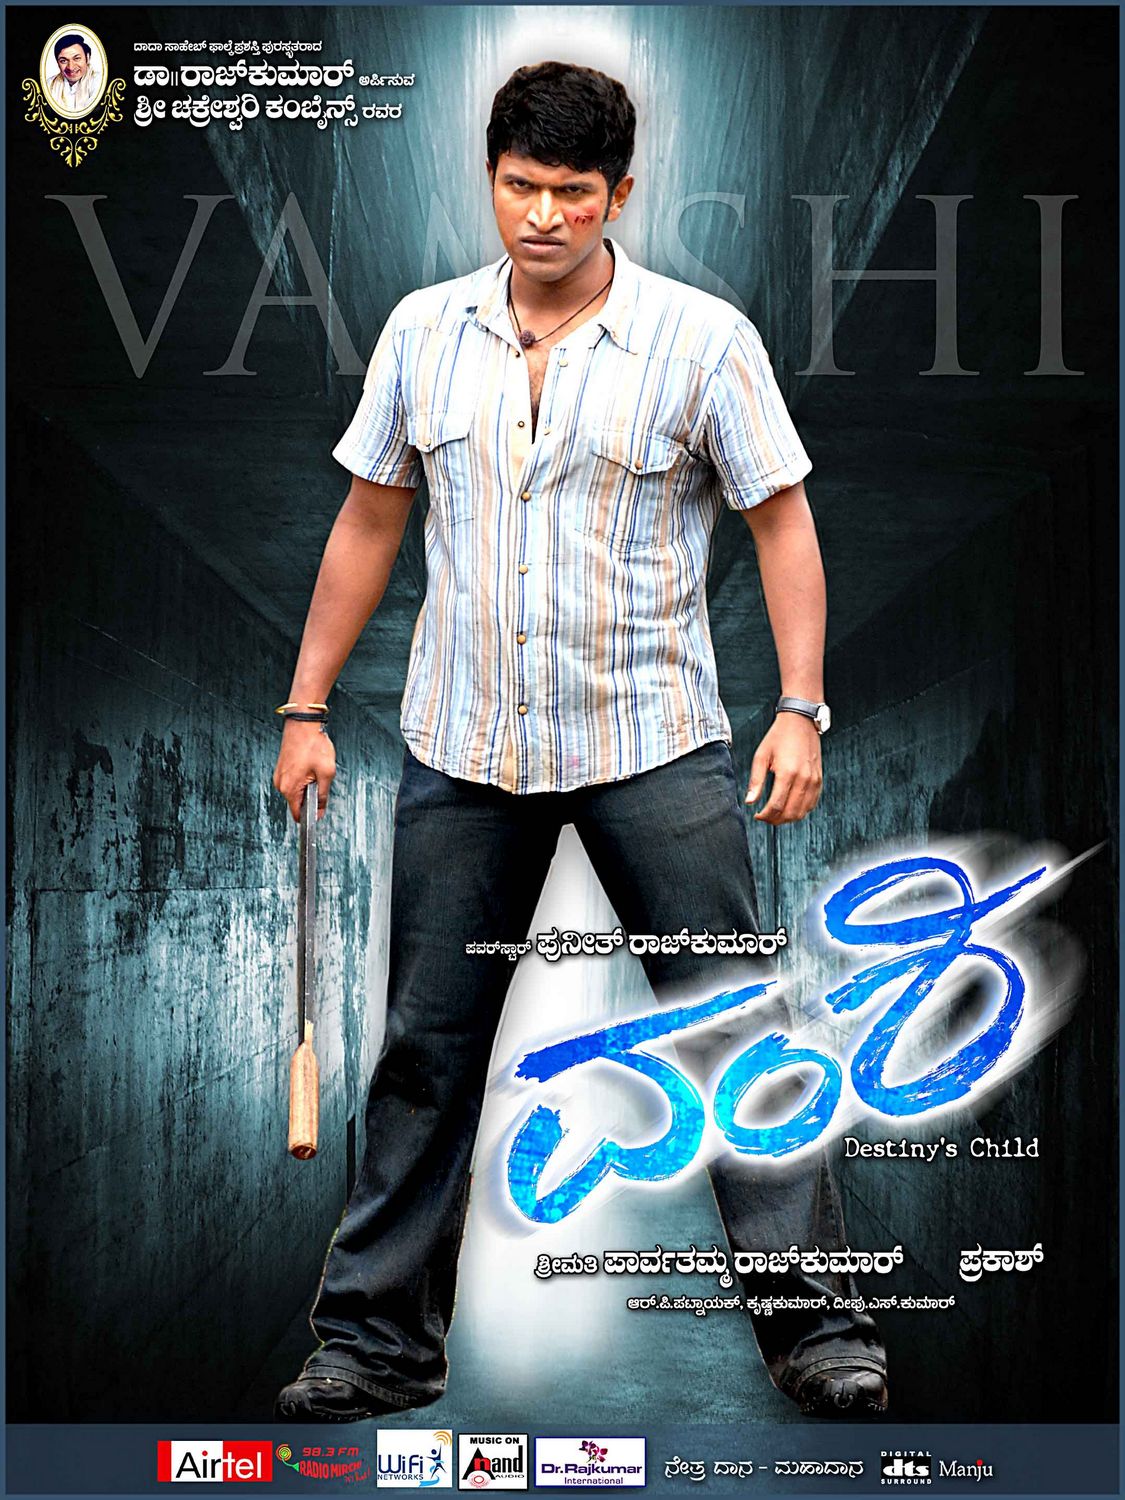 Extra Large Movie Poster Image for Vamshi (#19 of 25)